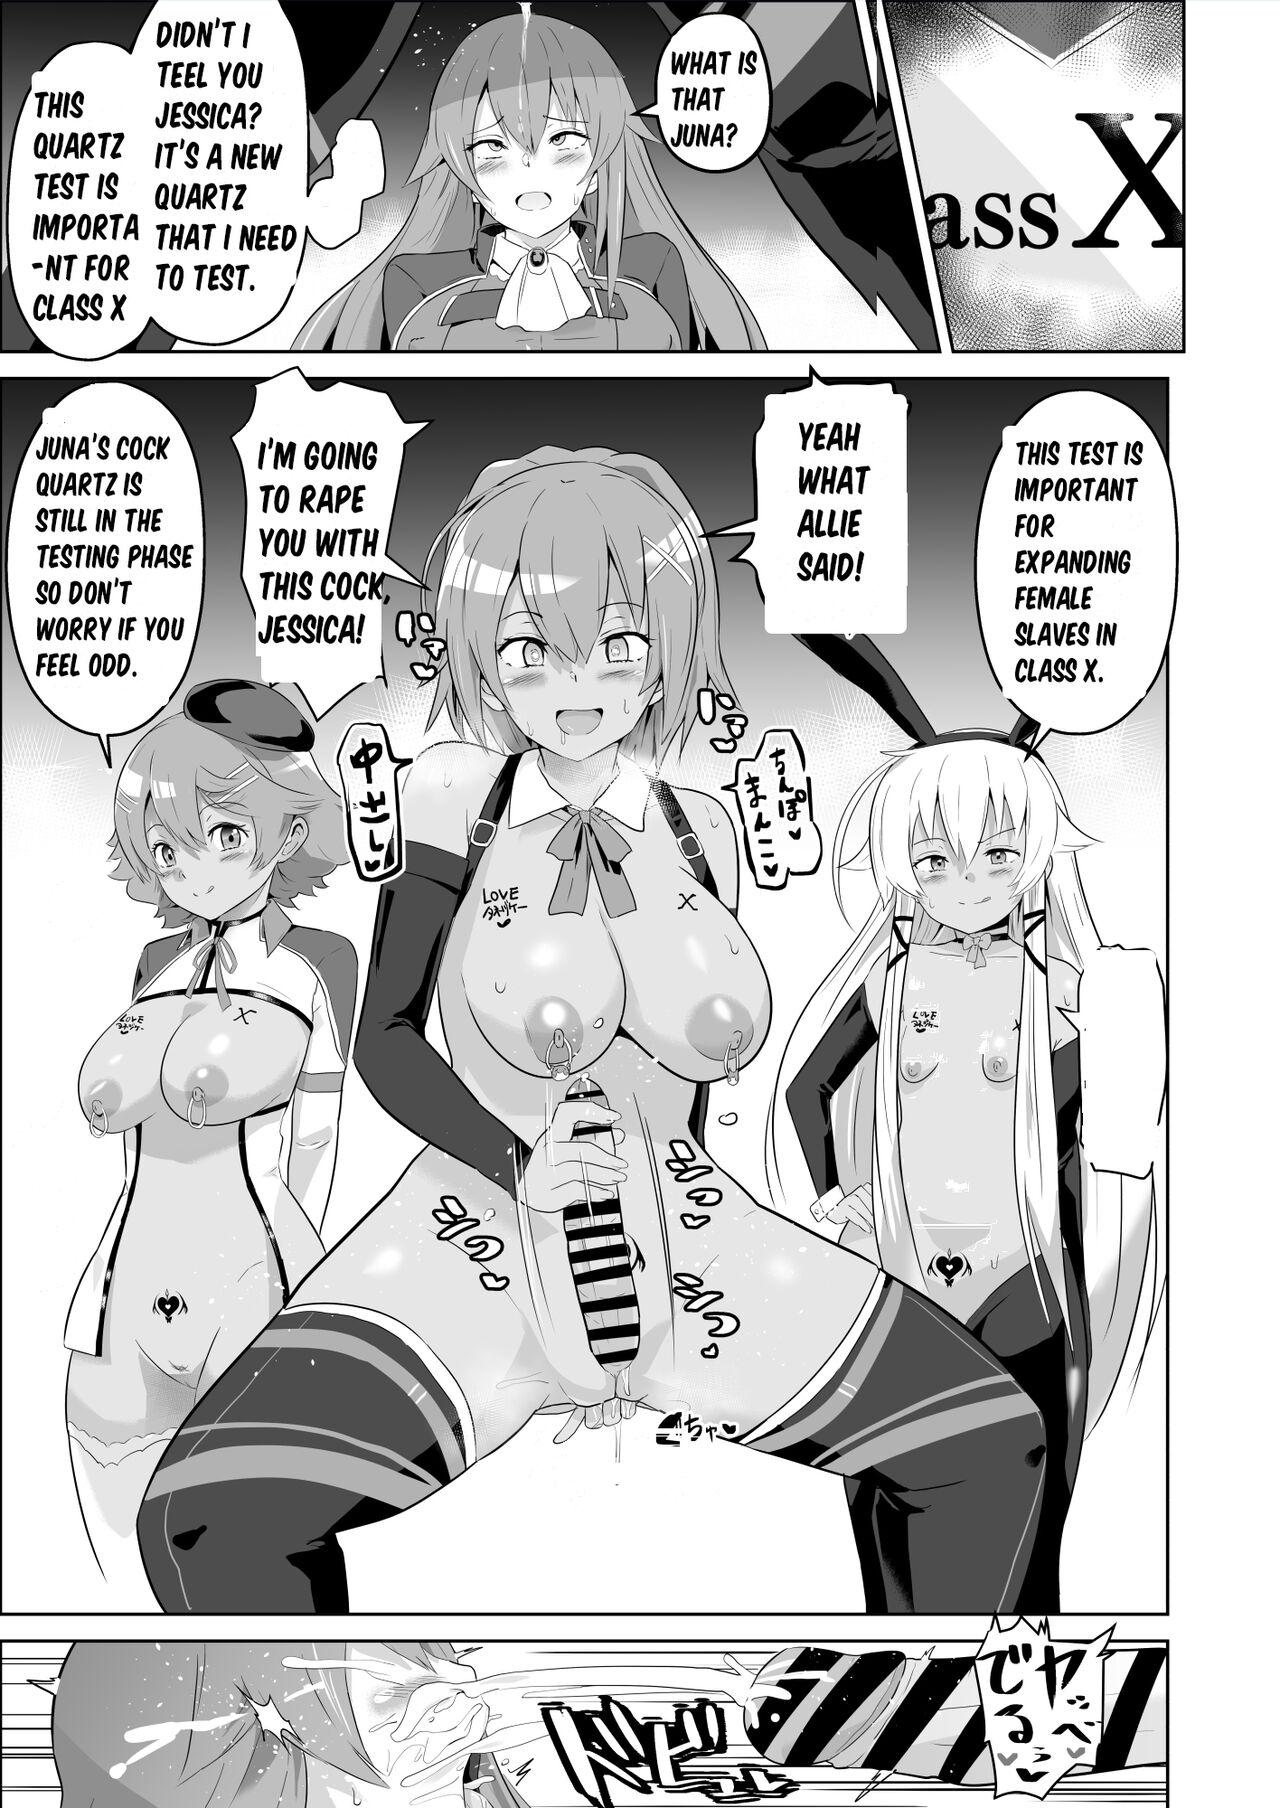 Hot Milf Hypnosis of the New Class VII - Aftermath - The legend of heroes | eiyuu densetsu Blowjob - Page 1